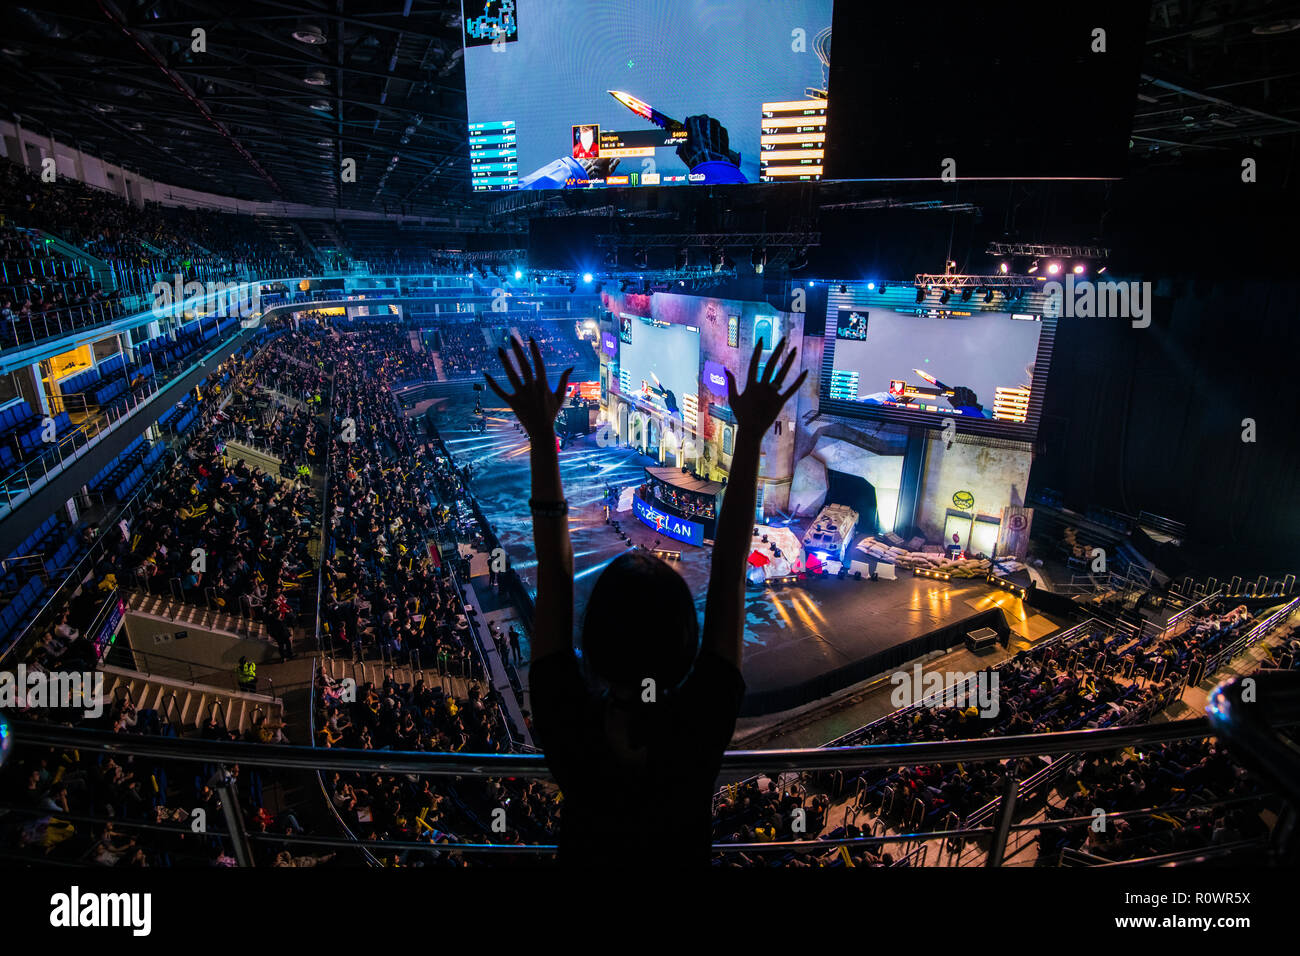 Editorial image of a Counter Strike: Global Offensive esports ...